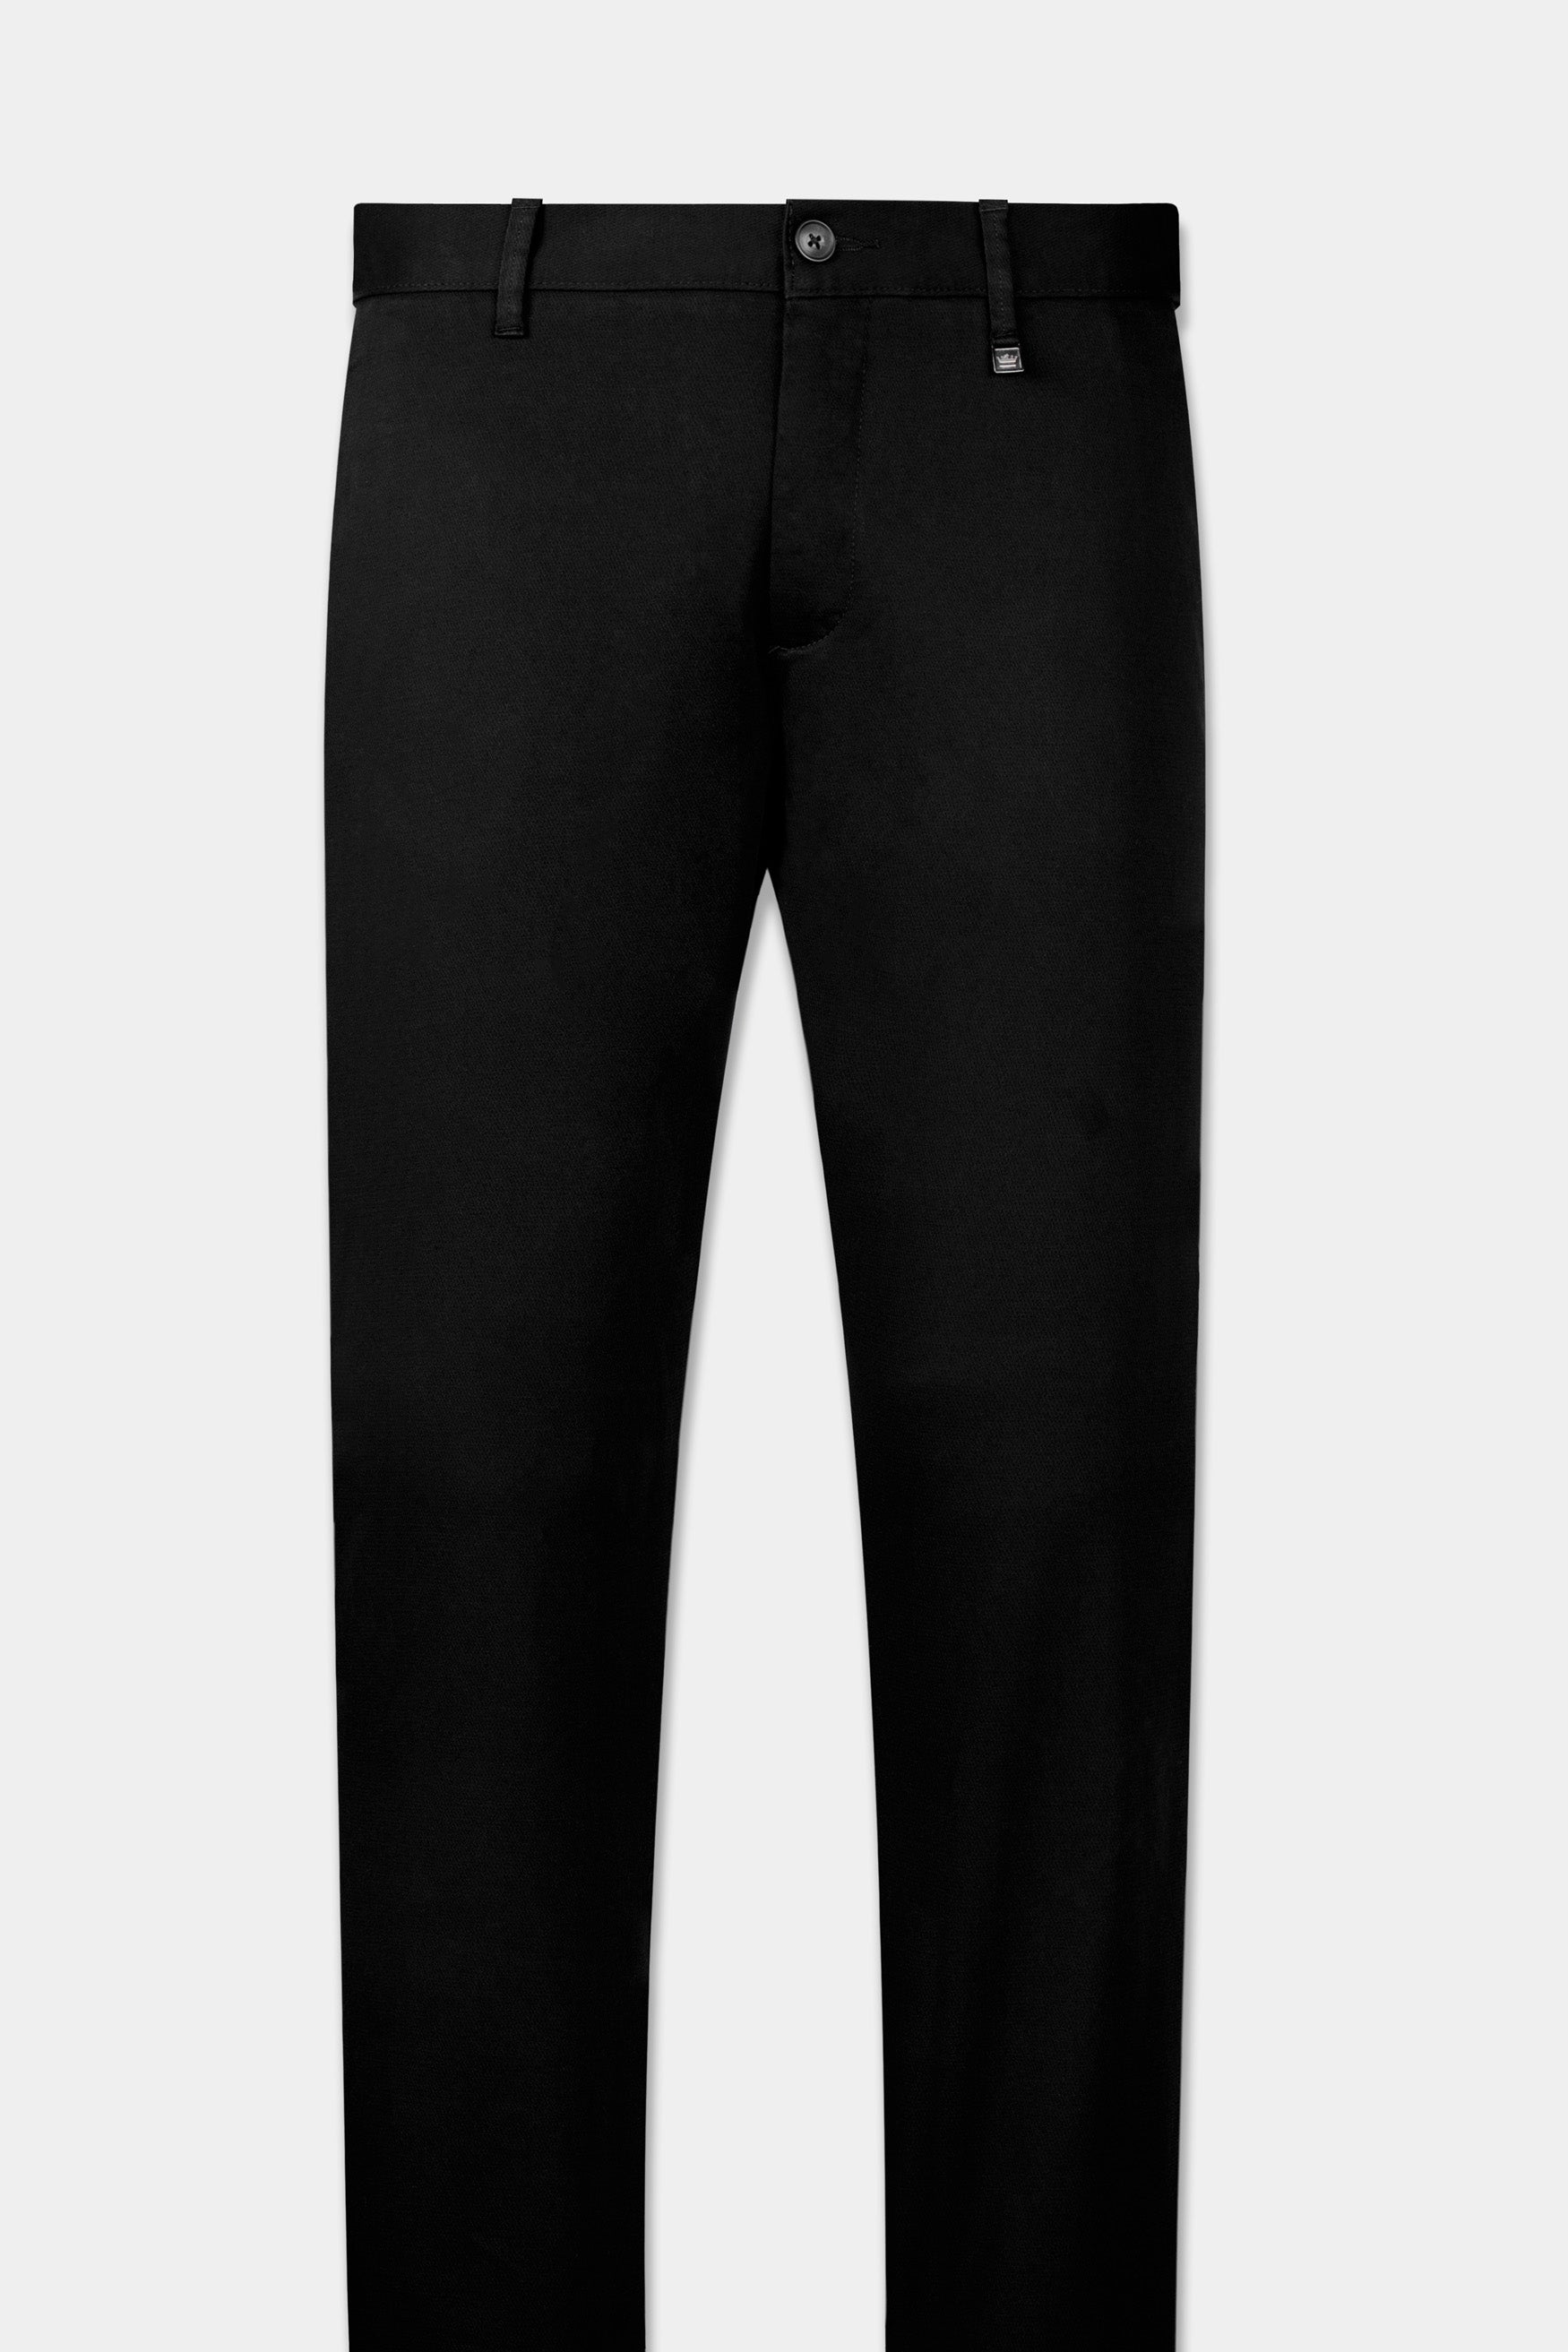 Black Cotton Mens Trouser at Rs 300 in Ausa | ID: 18372021230